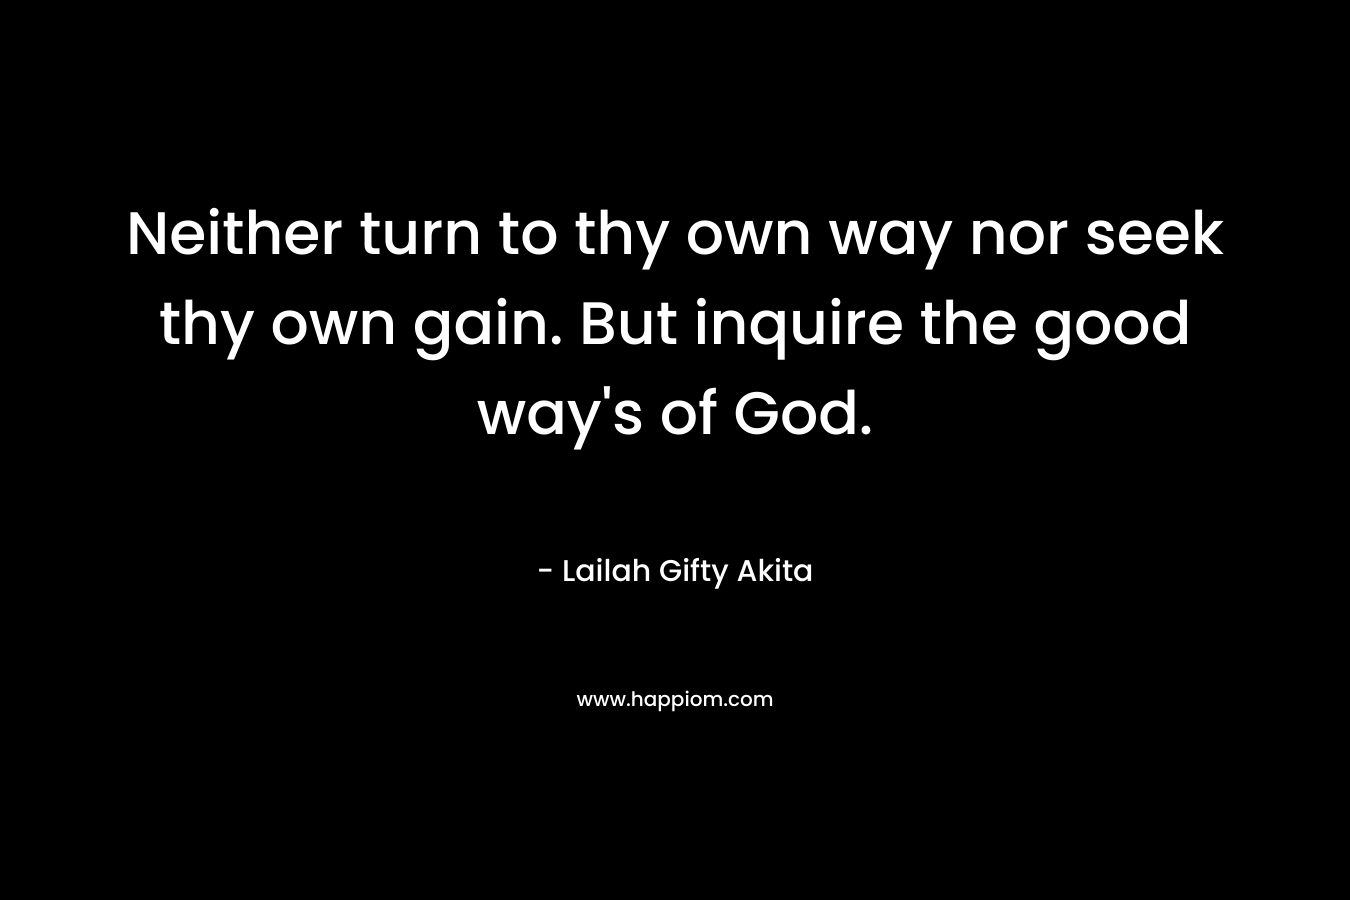 Neither turn to thy own way nor seek thy own gain. But inquire the good way's of God.